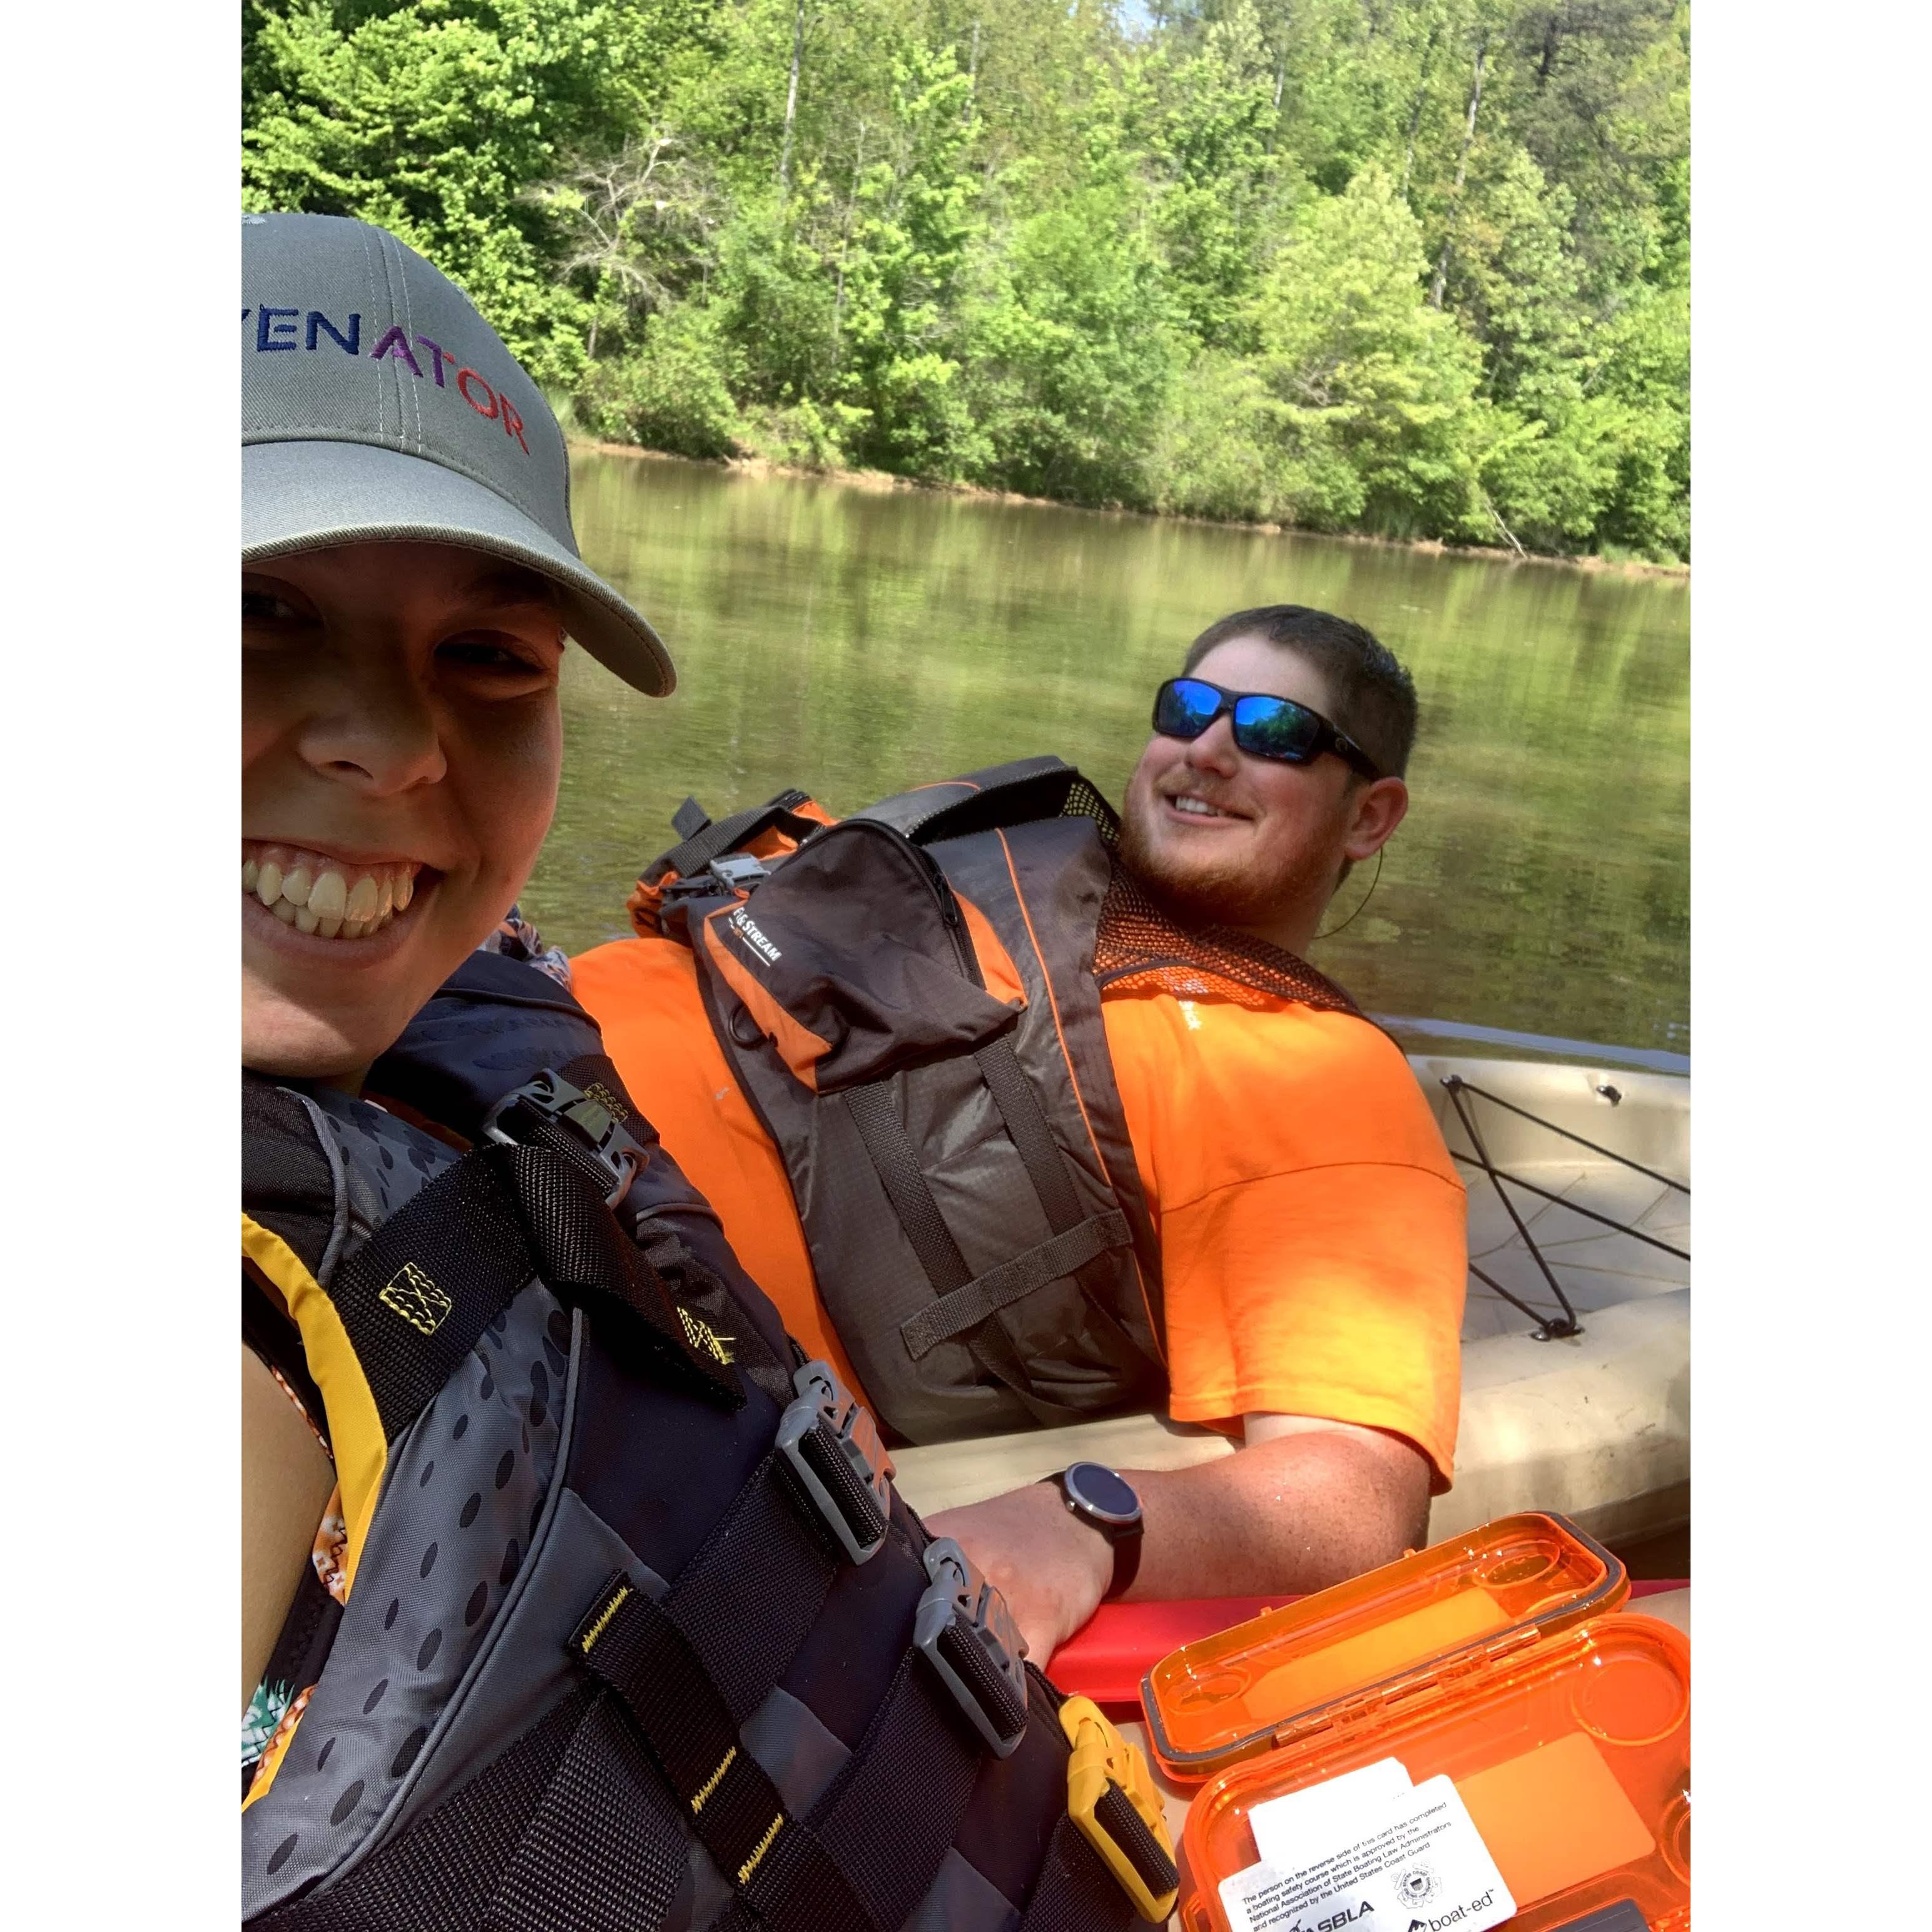 Our first kayaking adventure together!